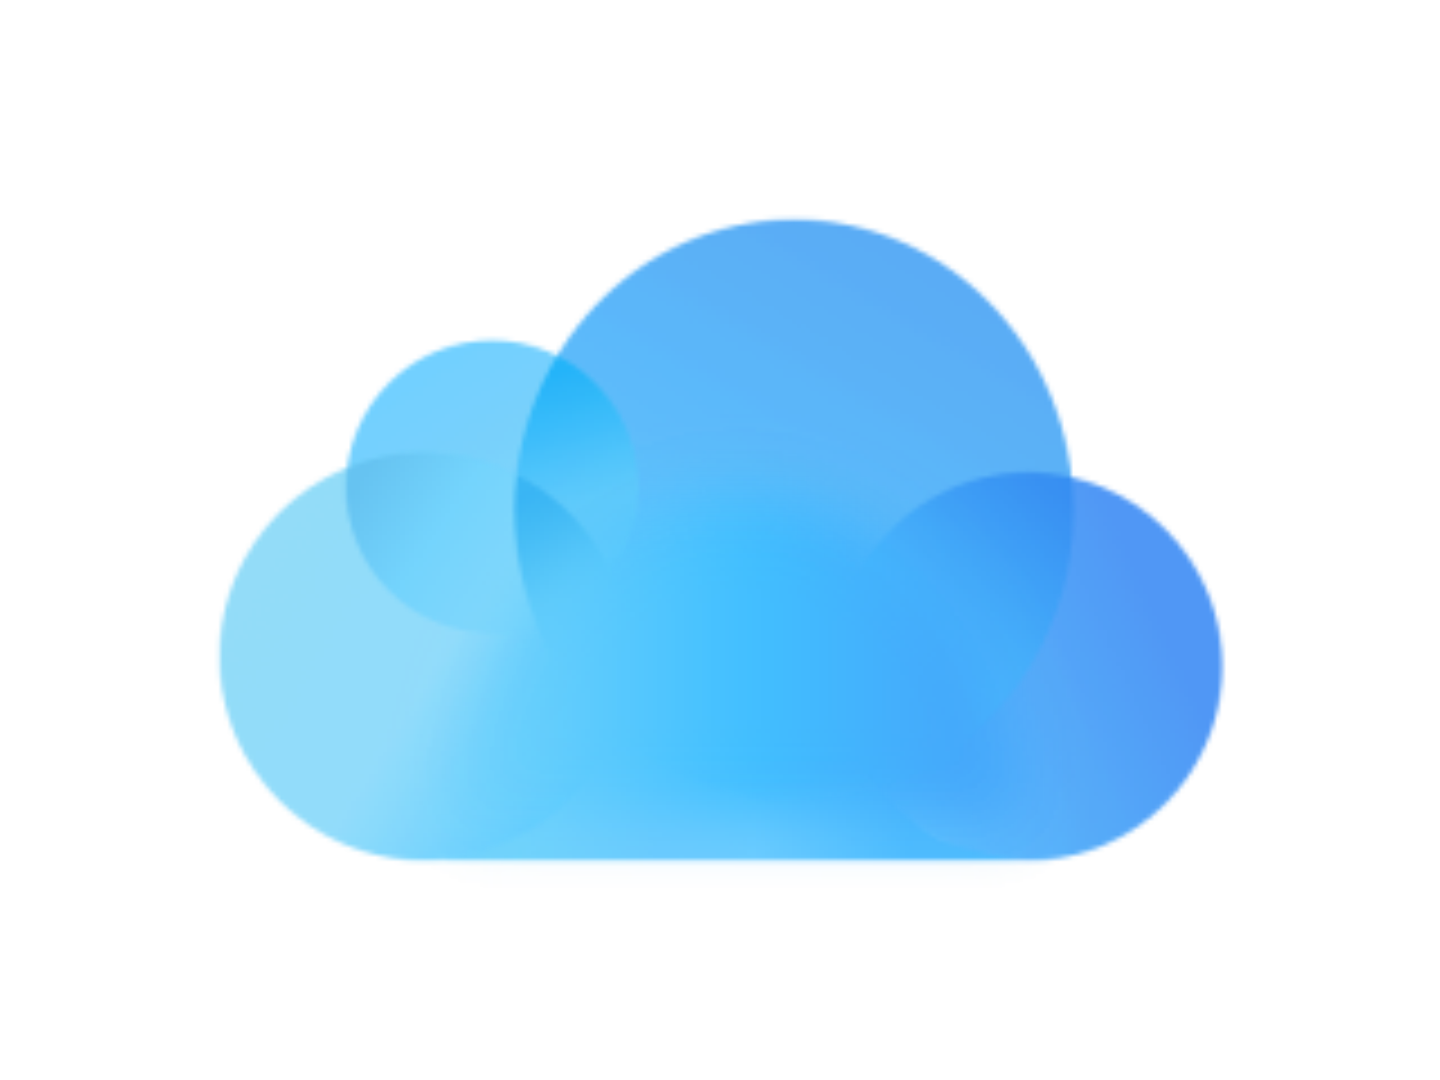 icloud-logos-revision-wikia-iphone-png-images-4.png